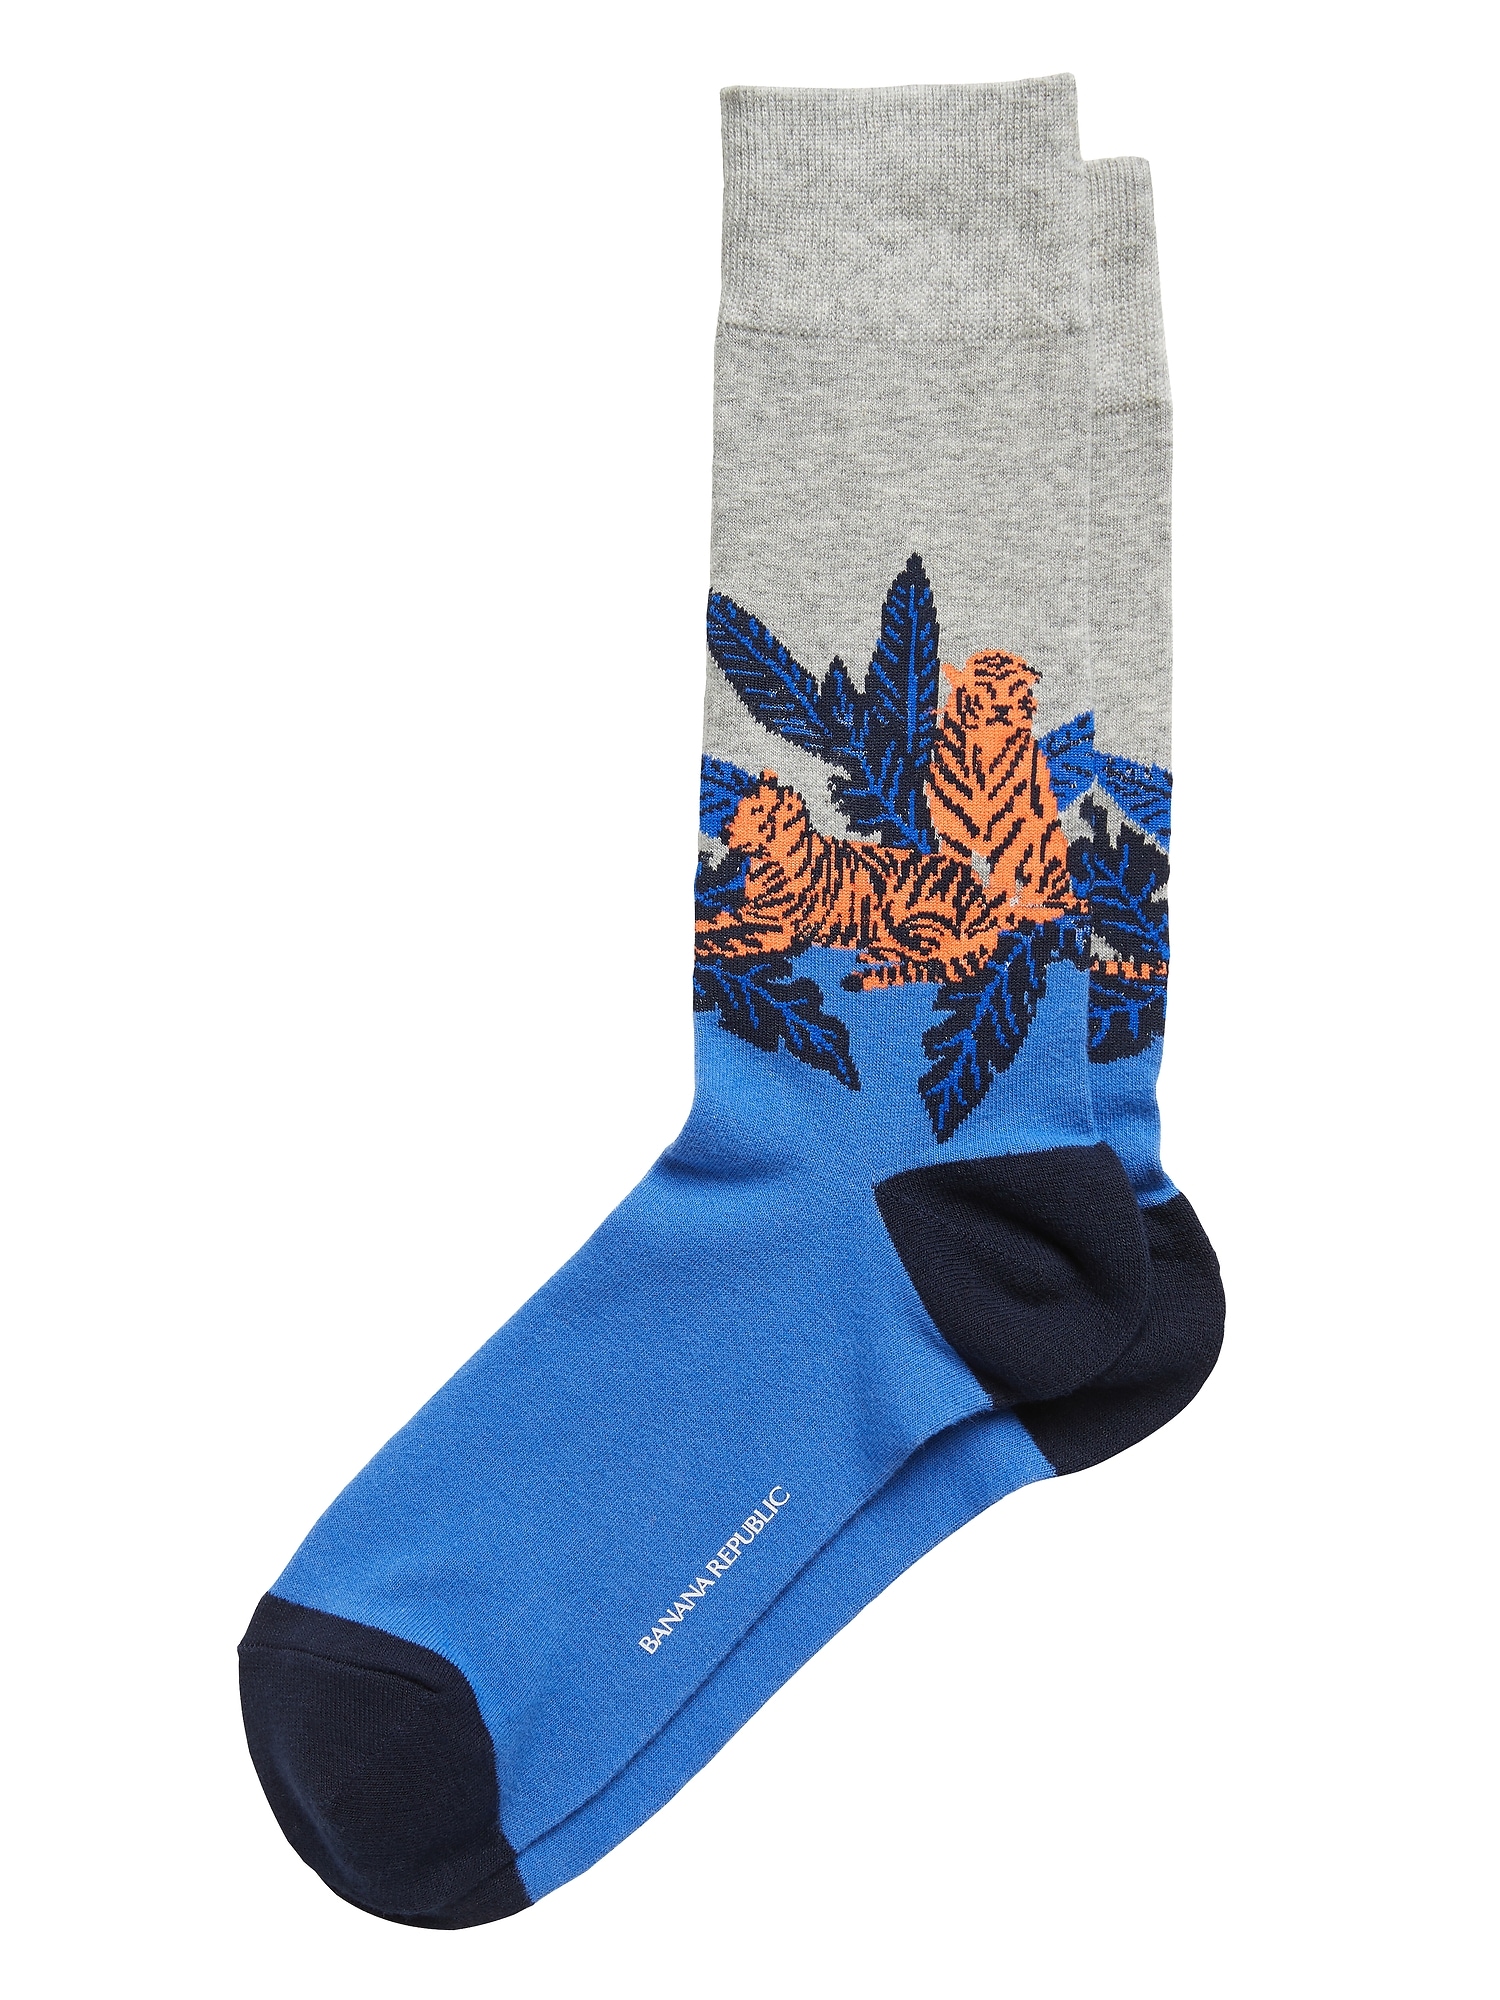 Two Tigers Scenic Sock